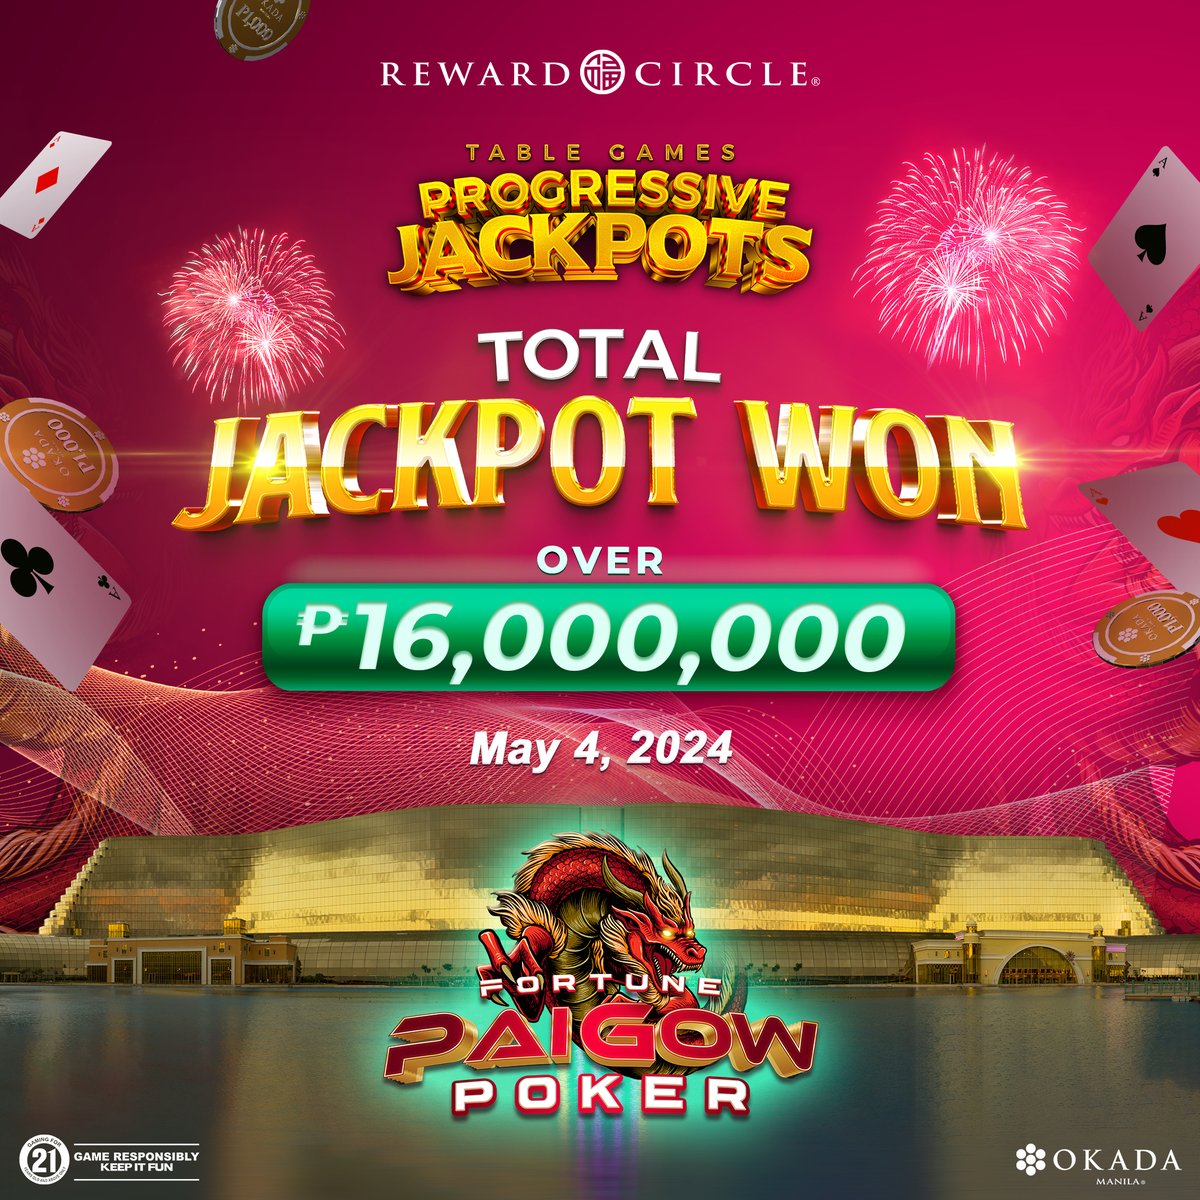 Congratulations to the Red Dragon Pai Gow Poker Major Jackpot winner who won over PHP 16 million last Saturday, May 4! Will you be the next big winner? Visit Okada Manila or play online at okadaonlinecasino.com to find out.